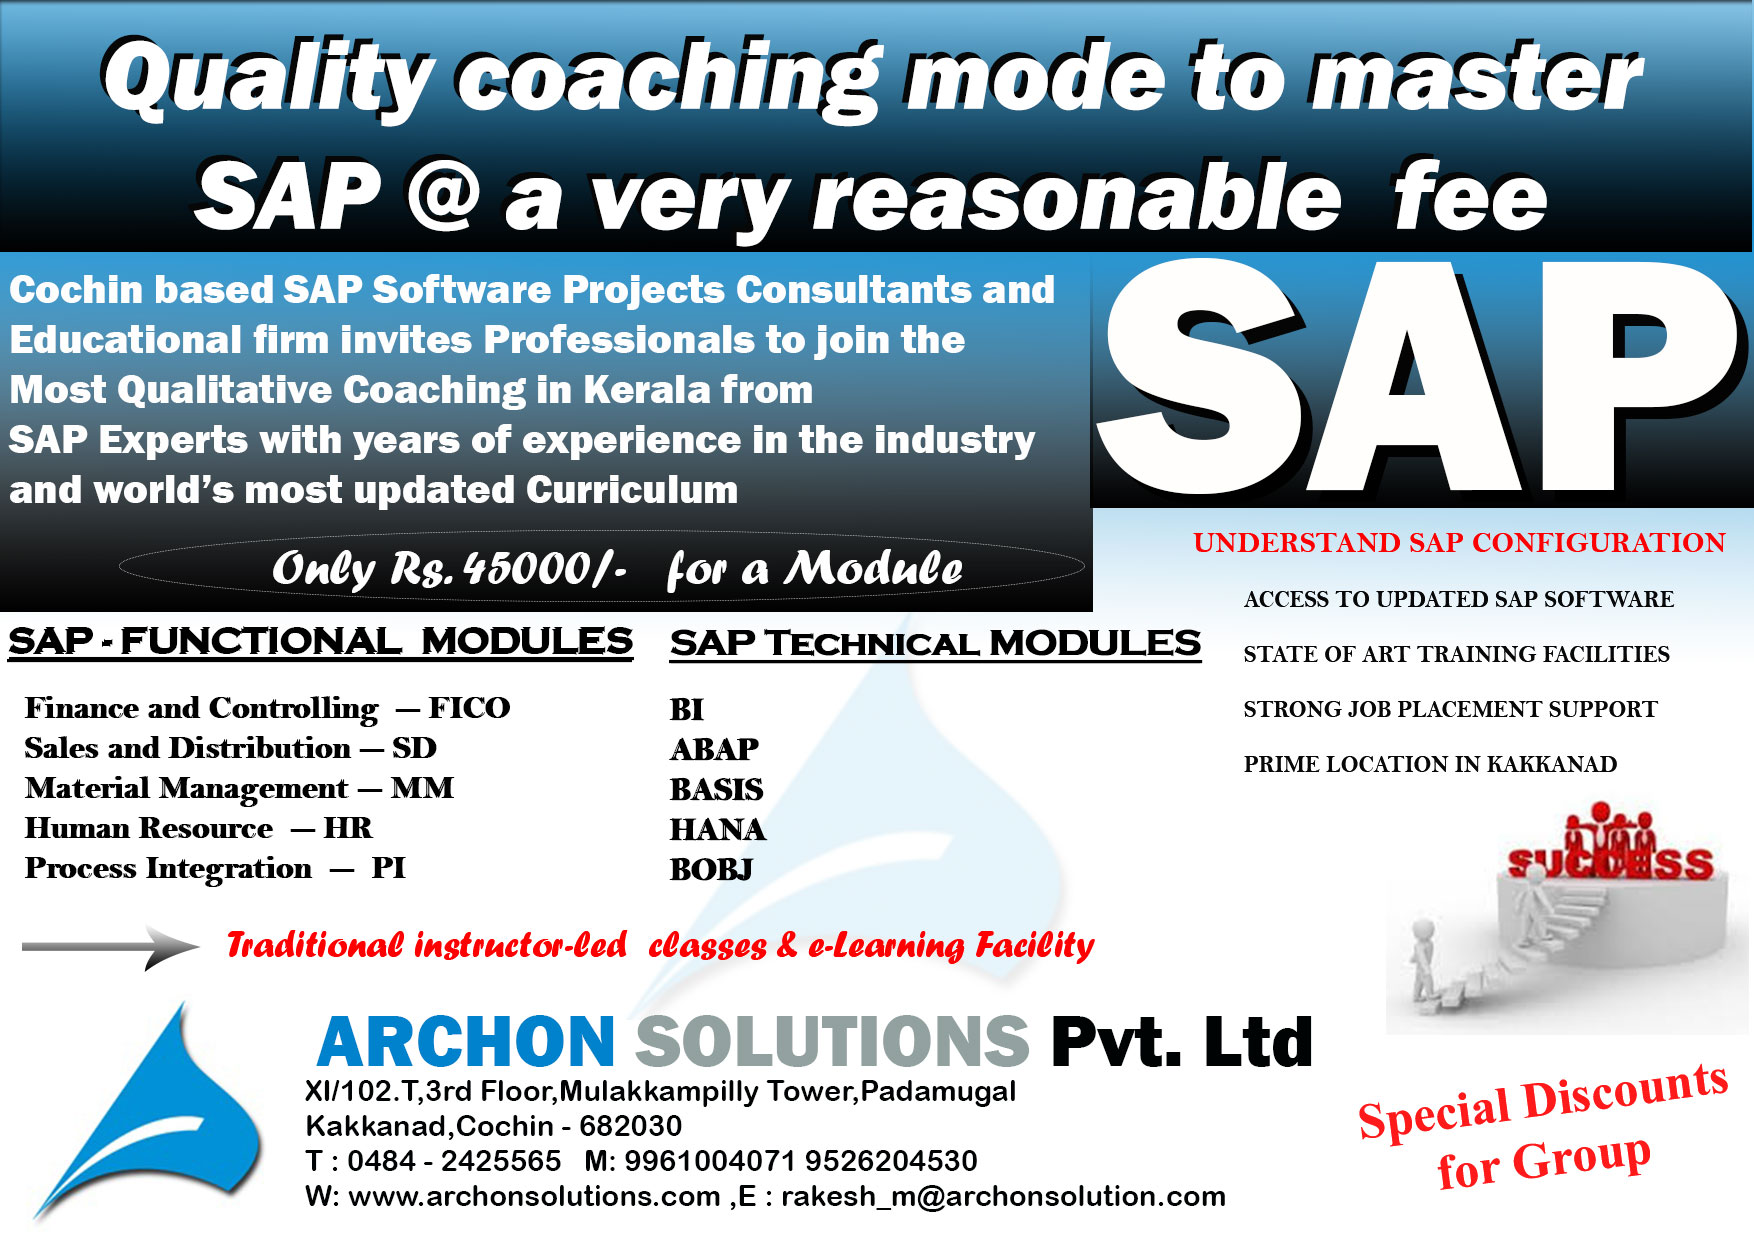 SAP Institute in Cochin by the ExpertsEducation and LearningCoaching ClassesAll Indiaother